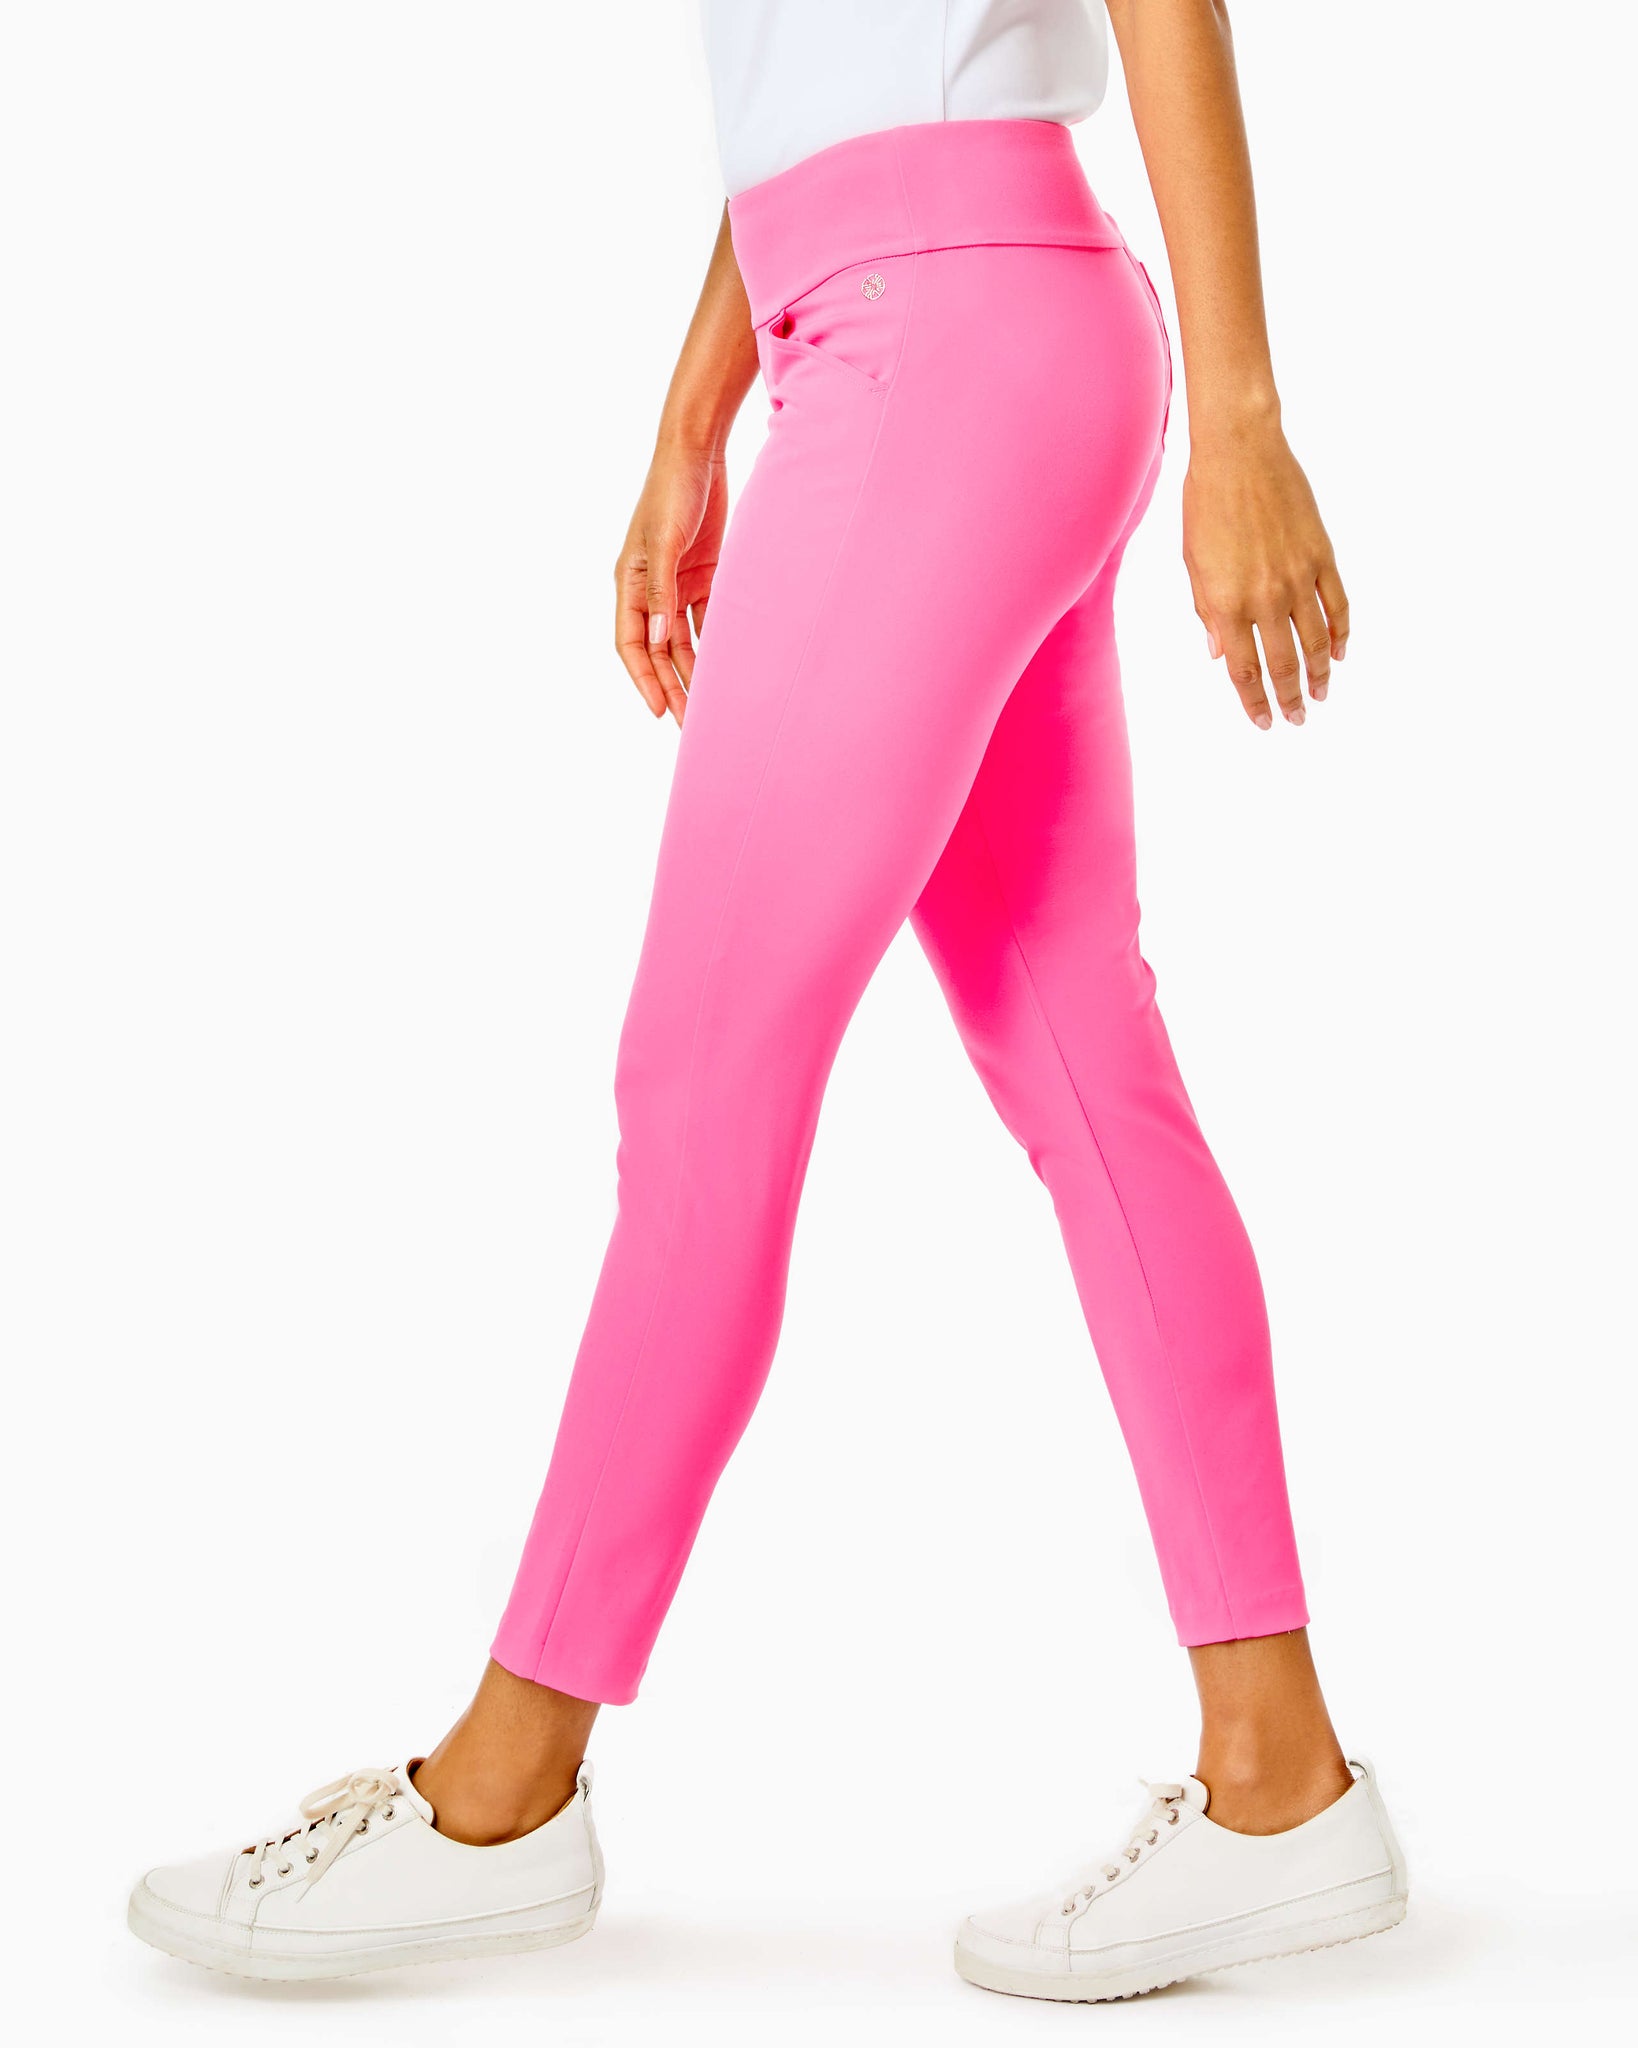 Lilly Pulitzer UPF 50 Luxletic Corso Pants for Women, Elasticized